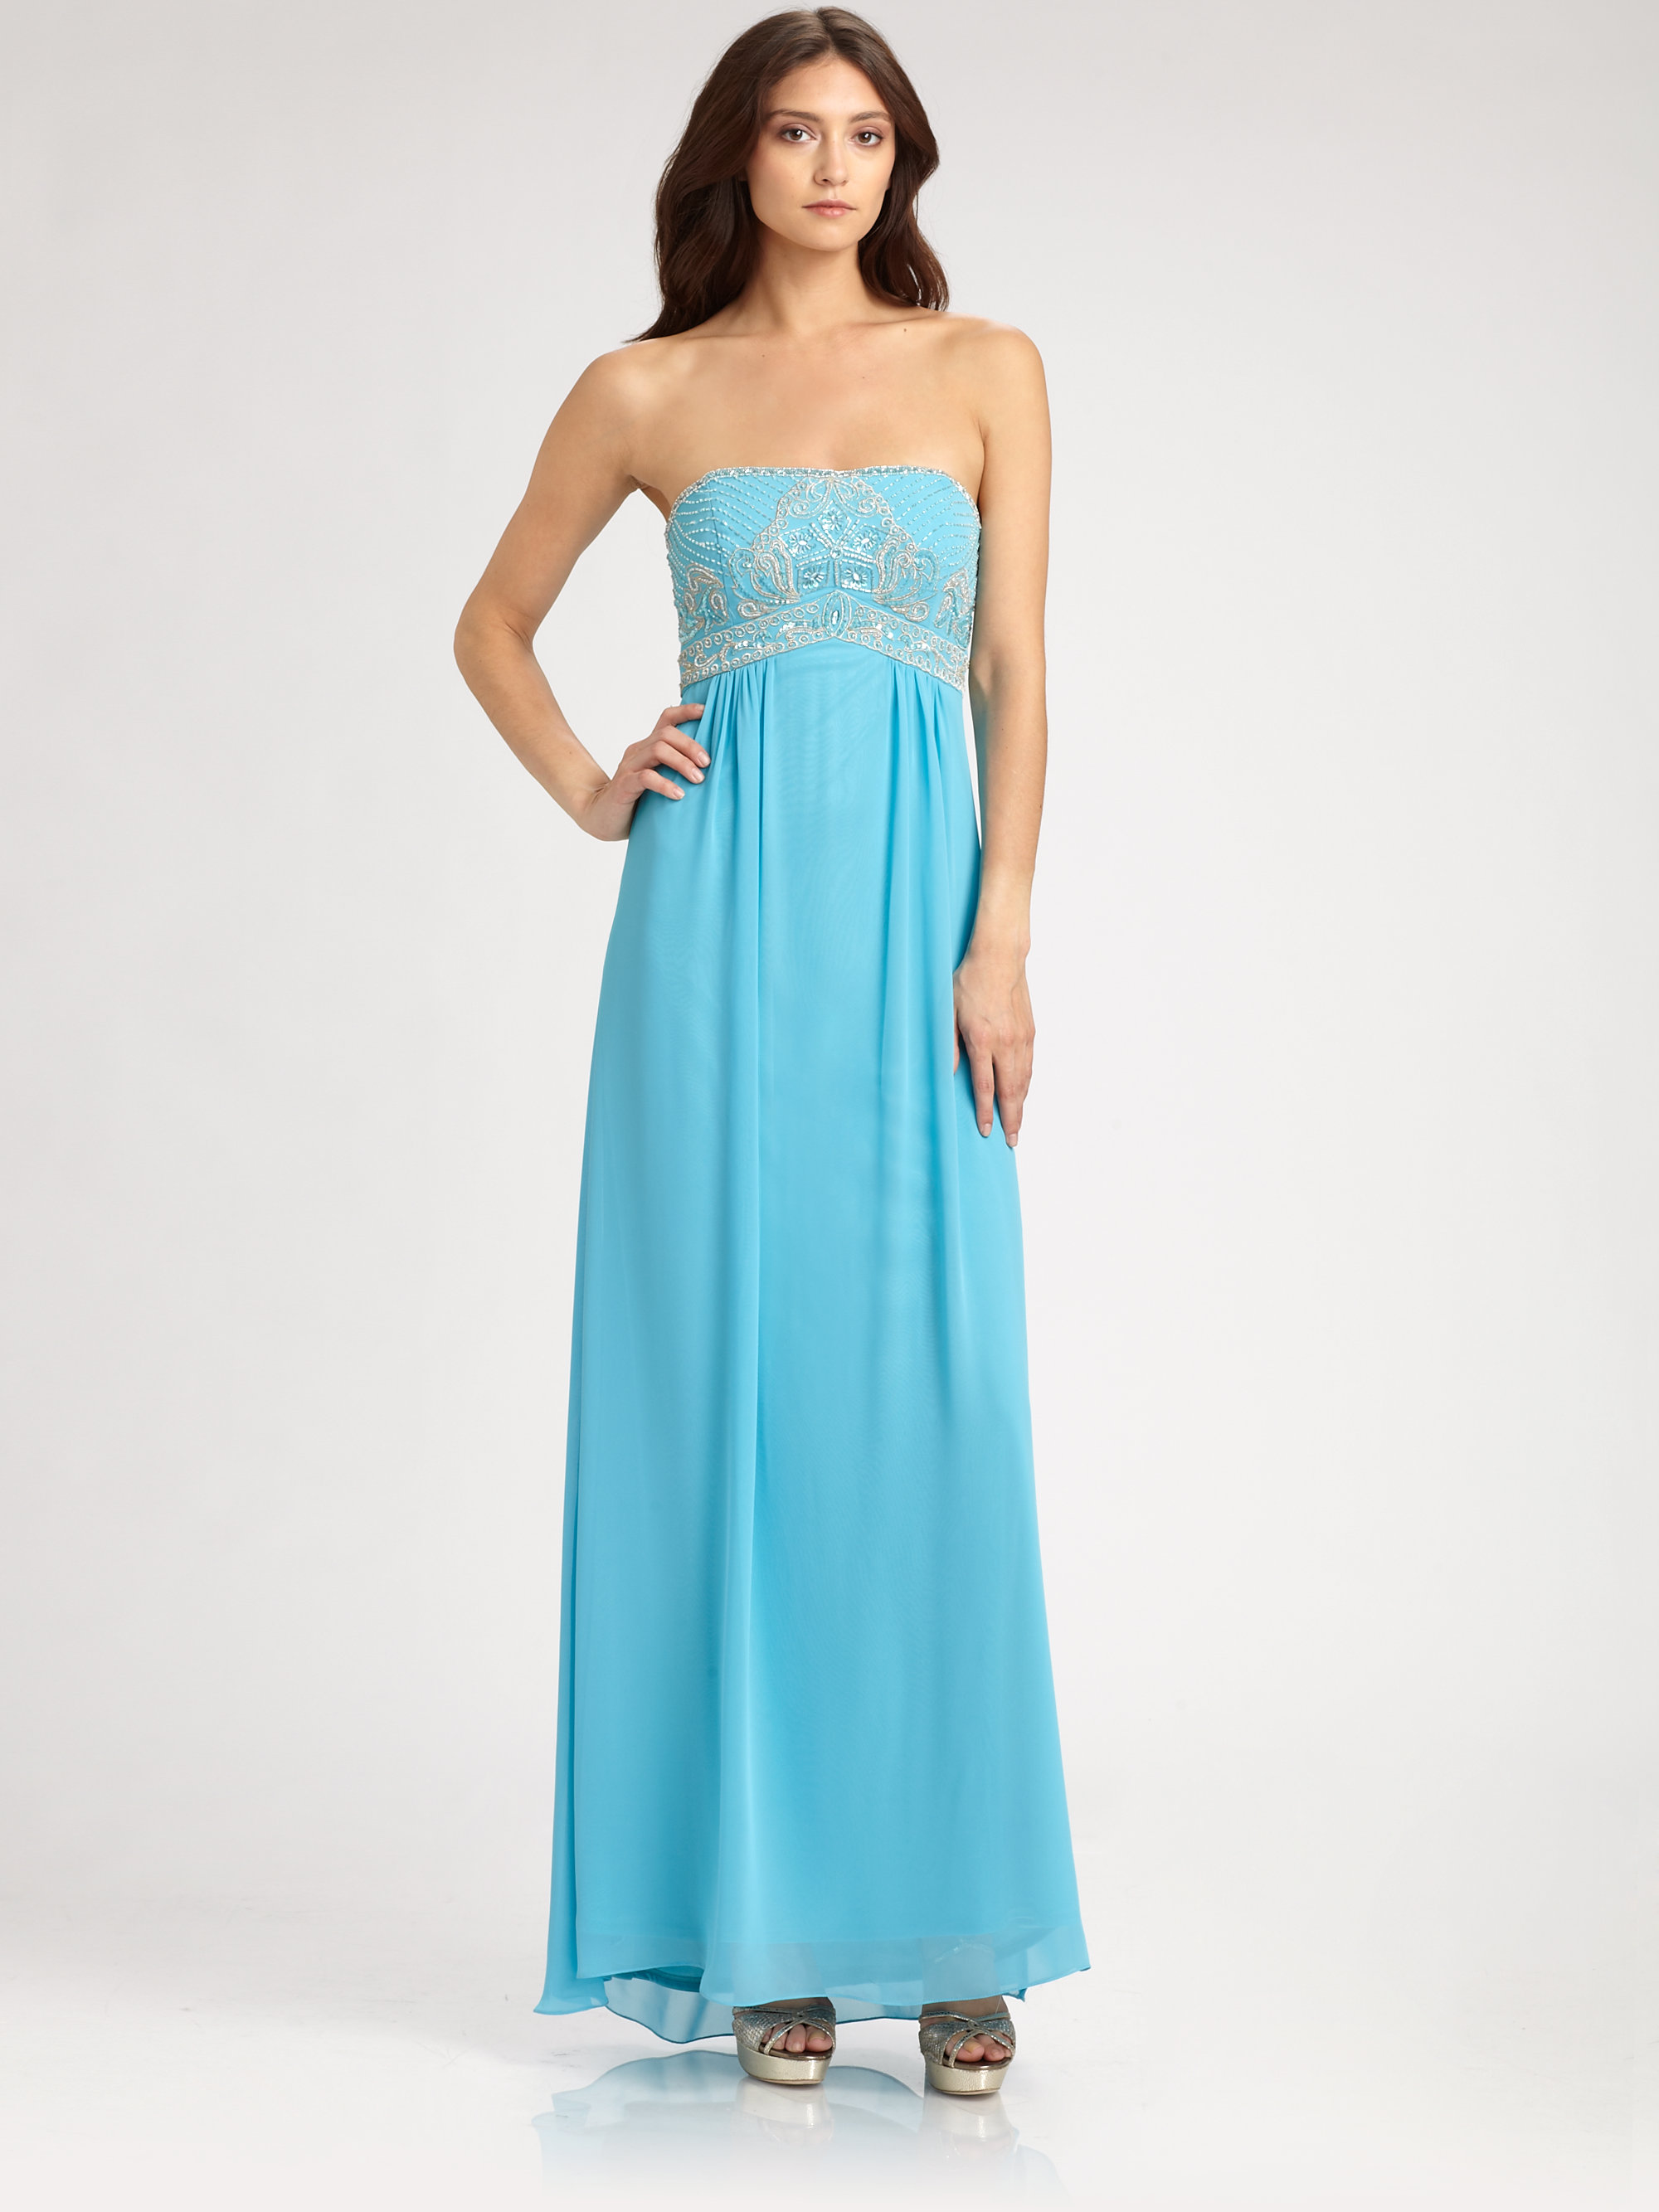 Lyst - Sue wong Strapless Gown in Blue